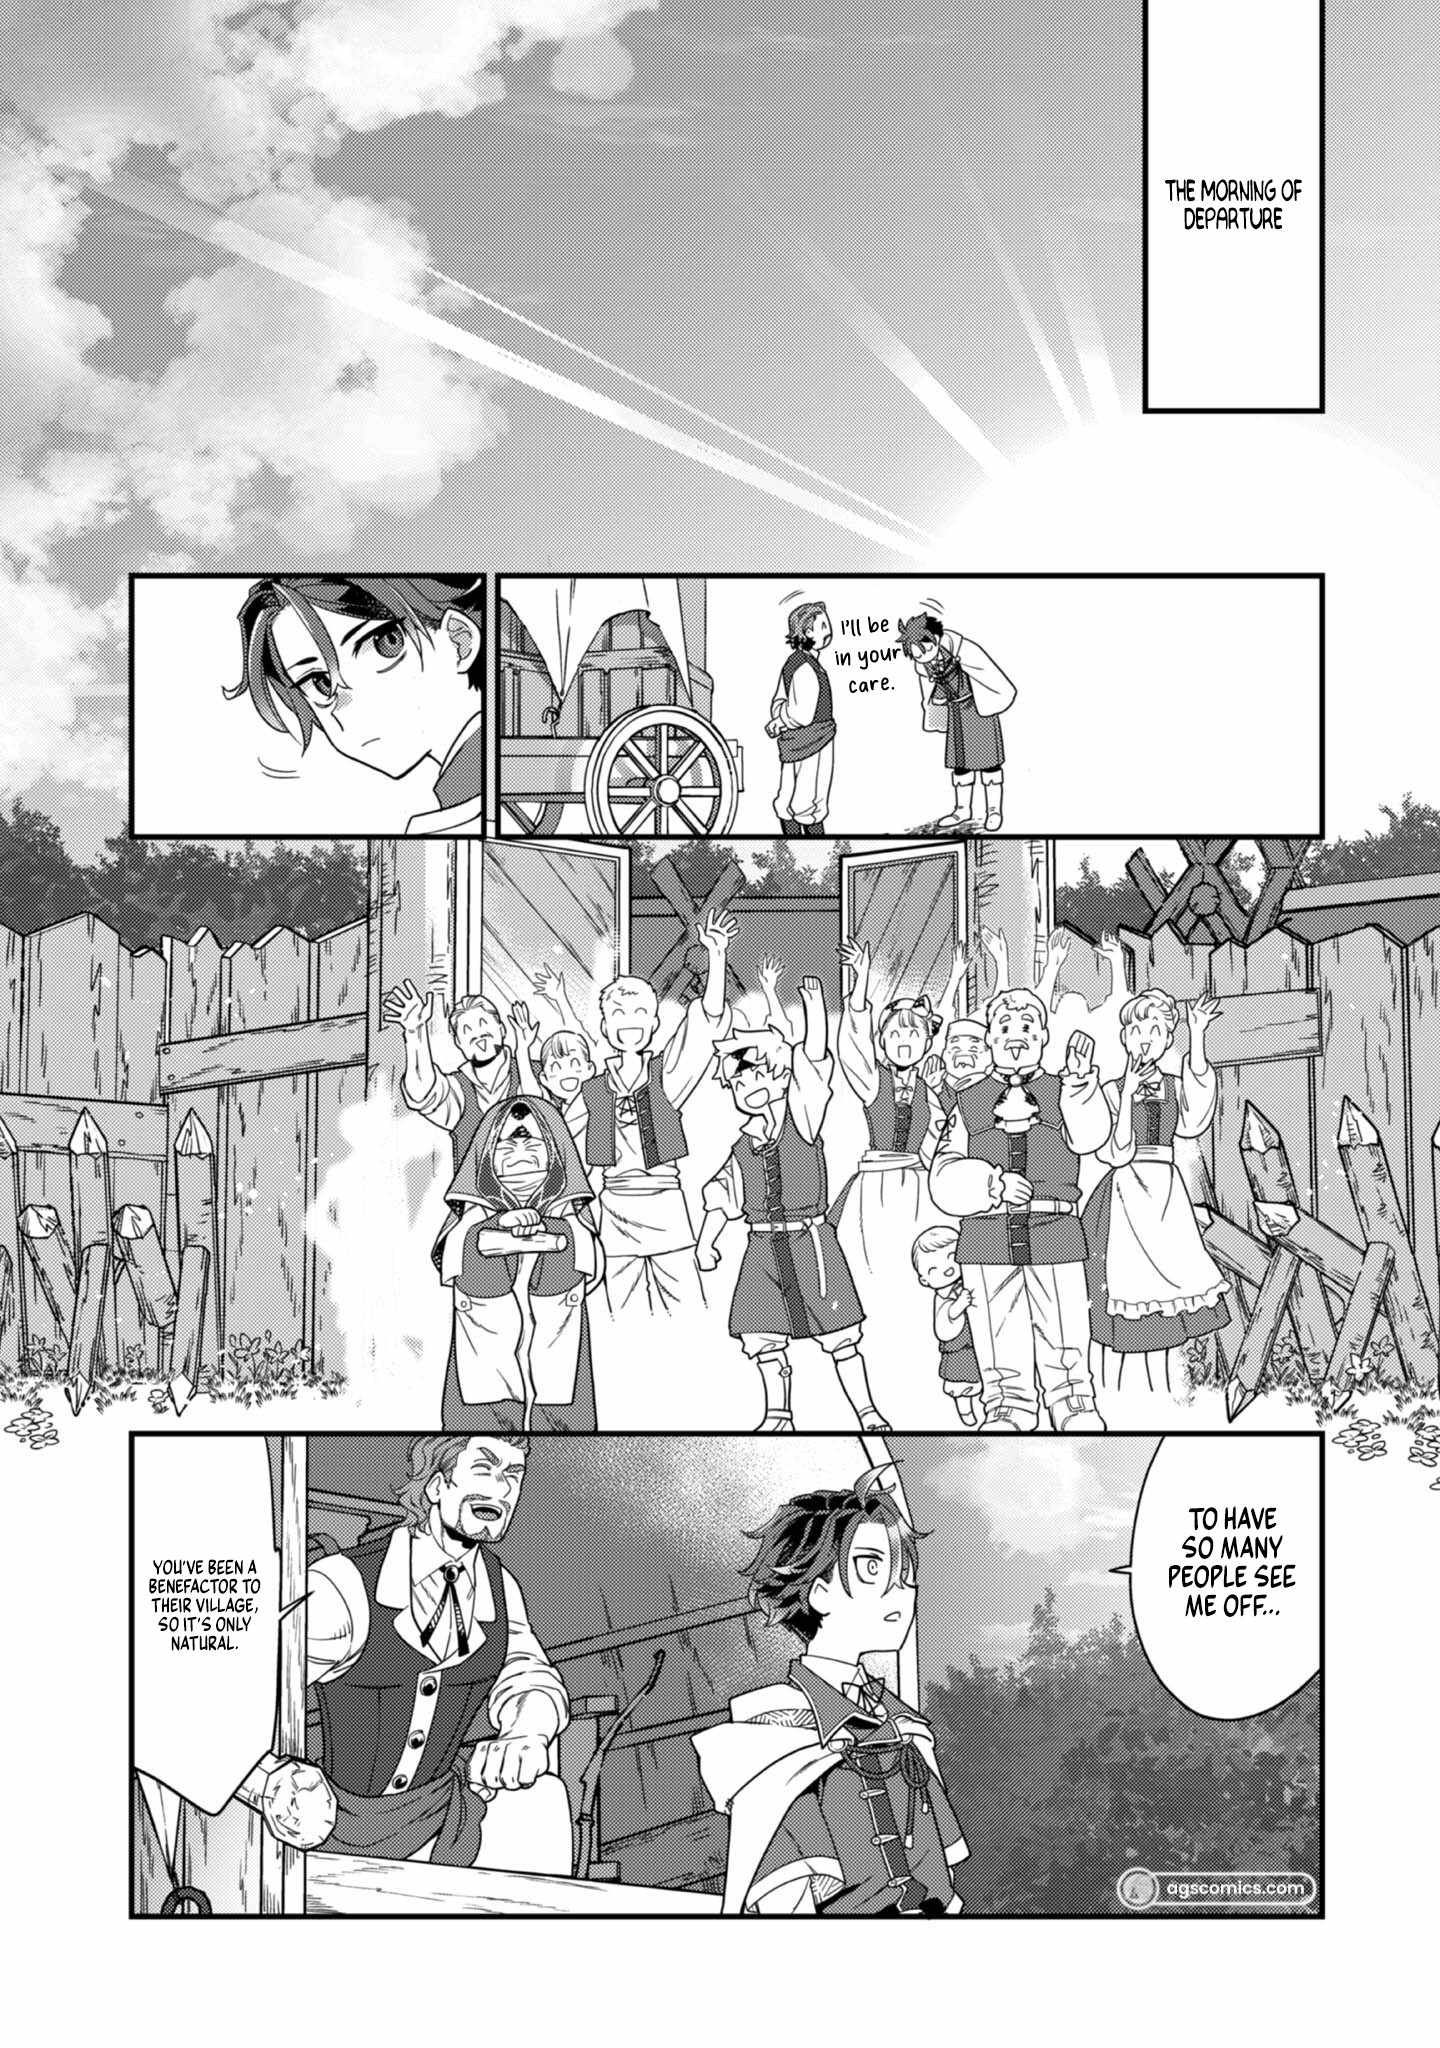 The Only Job Changer in the World chapter 5 page 26